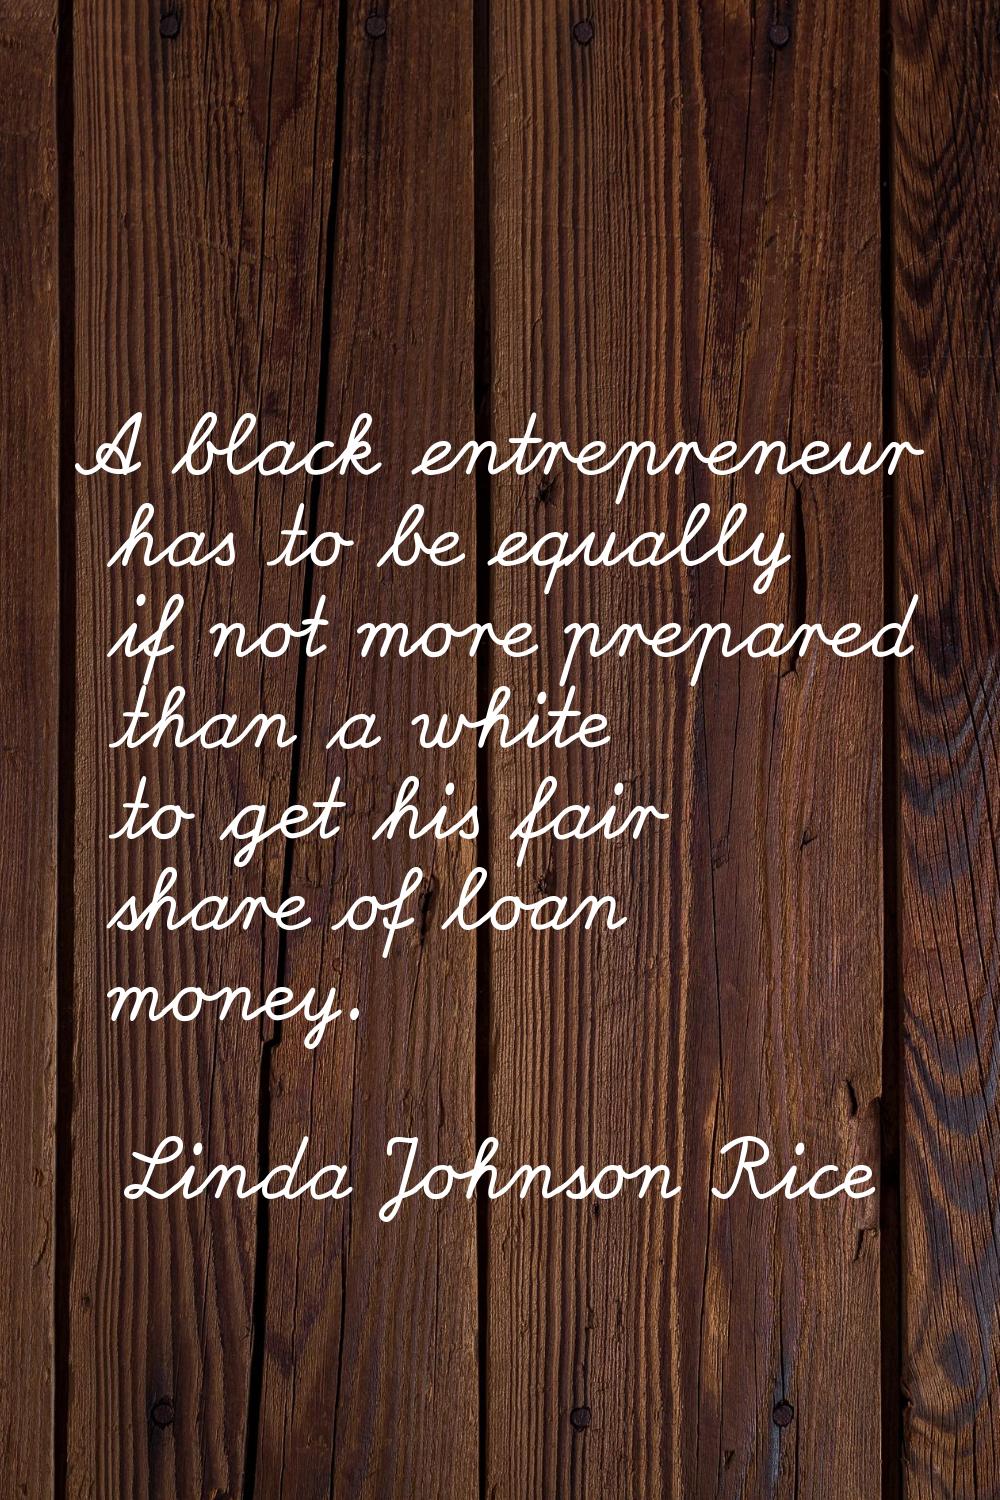 A black entrepreneur has to be equally if not more prepared than a white to get his fair share of l